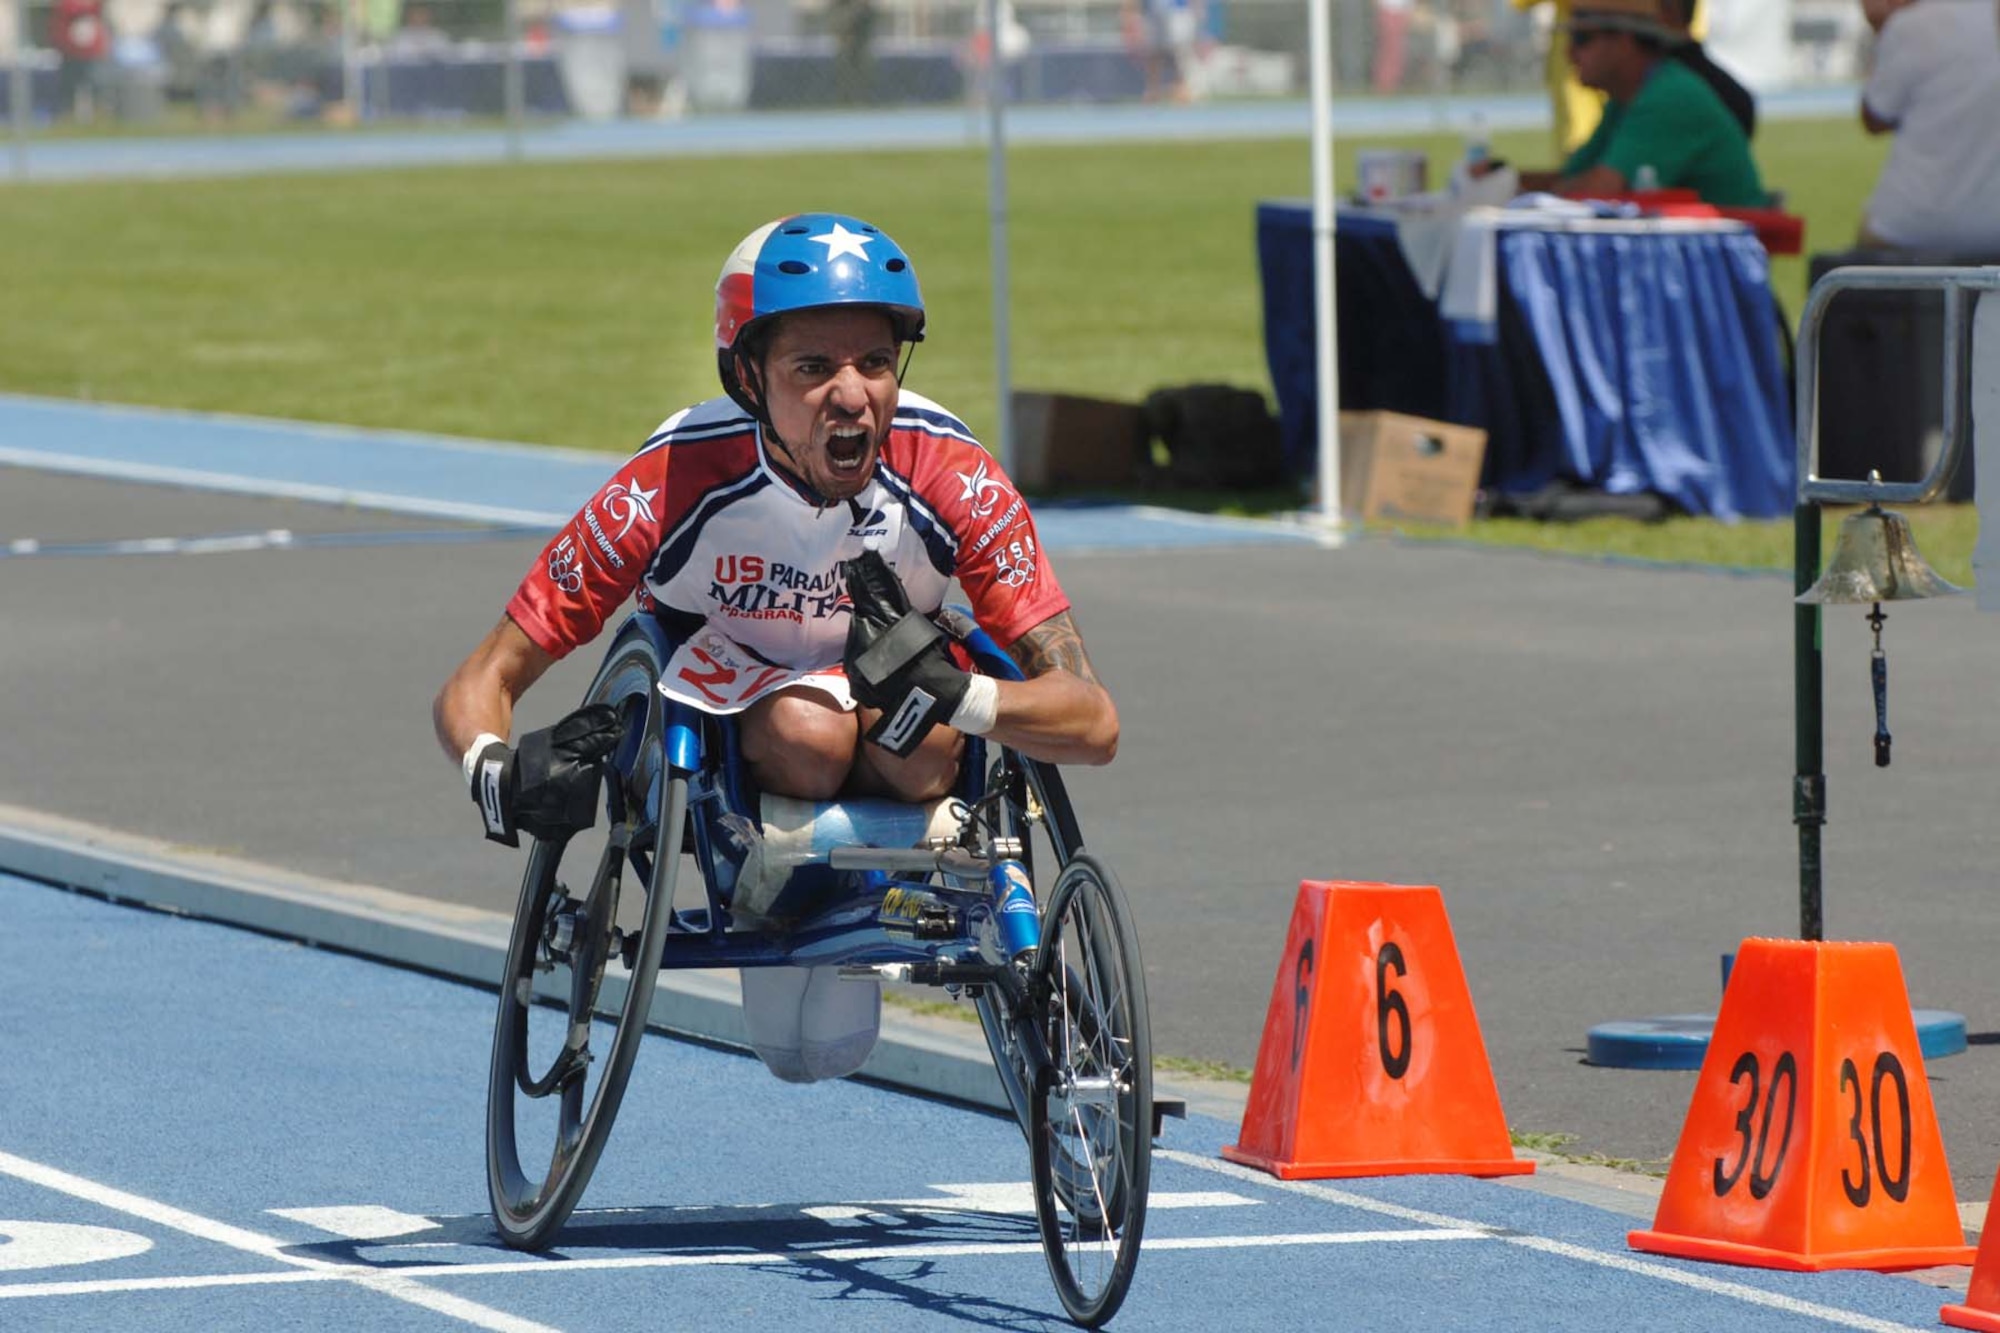 More than 600 disabled veteran athletes will compete in 17 different sports Aug. 1 through 6, 2011, during the 31st National Veterans Wheelchair Games in Pittsburgh. The event is presented each year by officials with the Department of Veterans Affairs and the Paralyzed Veterans of America.  (Courtesy photo)